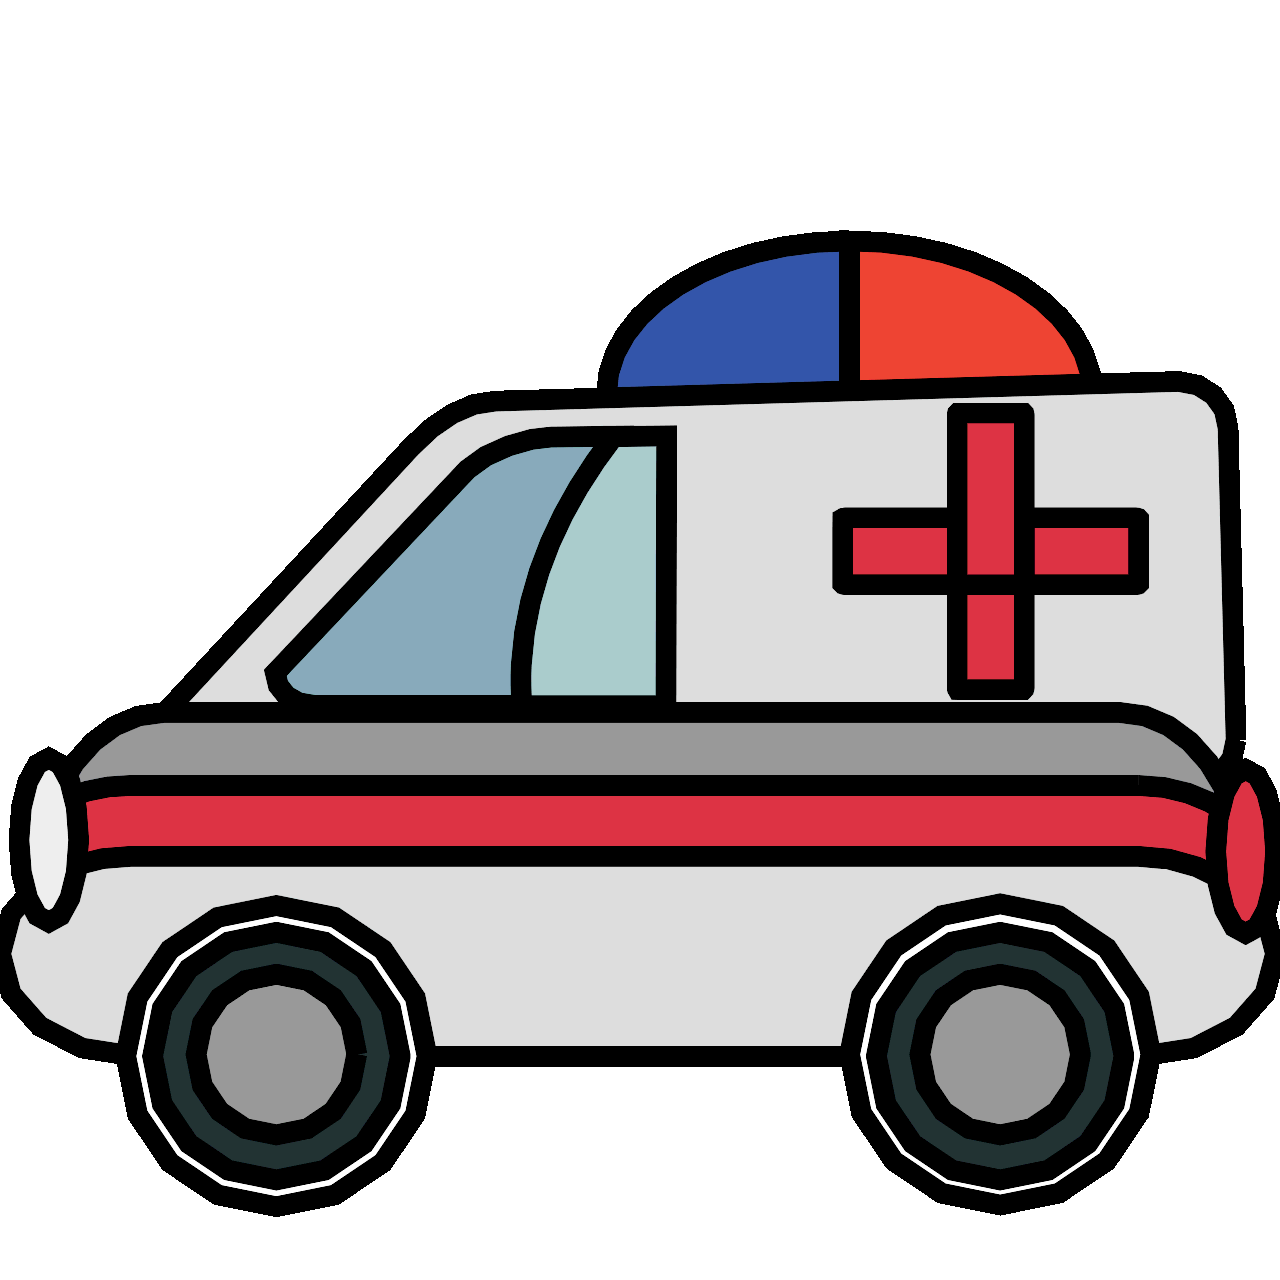 Ð ambulance emoji images download big picture in hd animation image and vector graphics